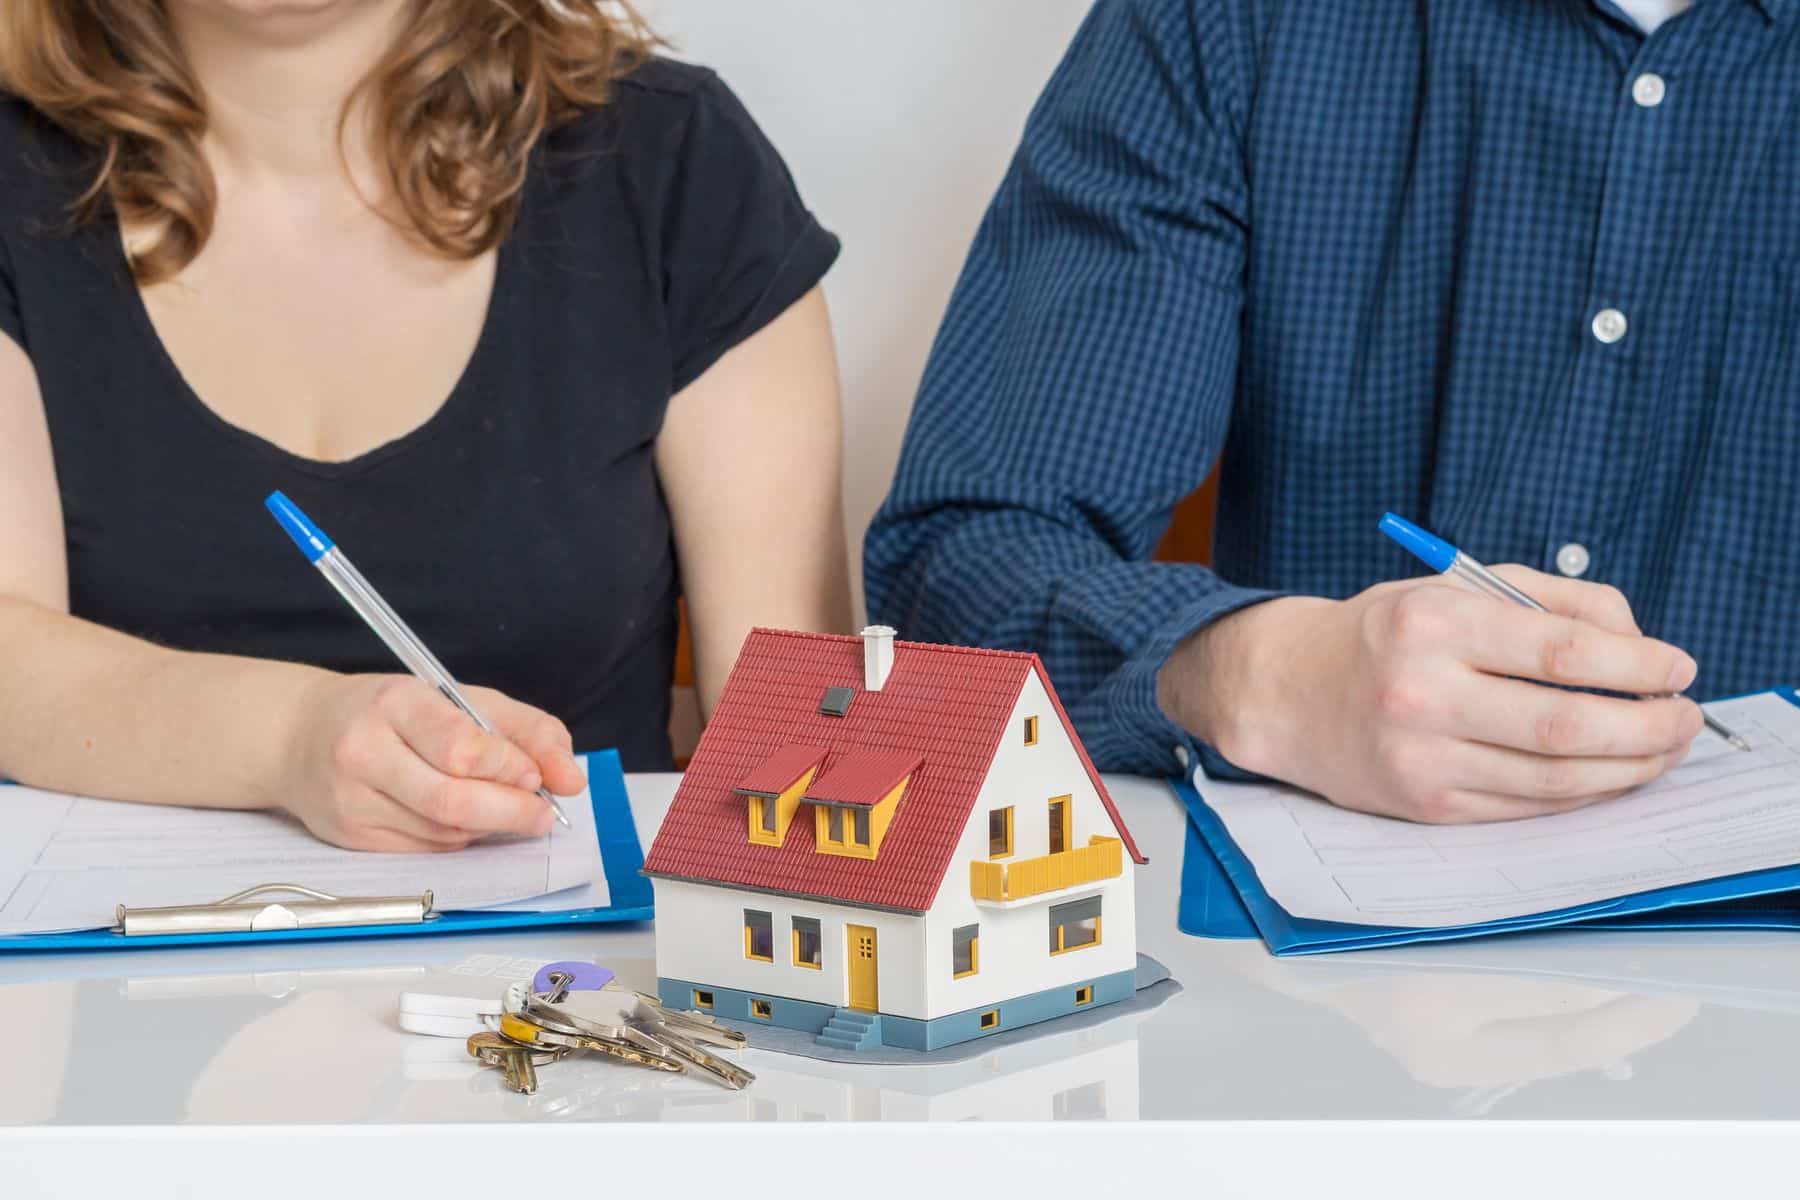 Can You Modify Your Divorce’s Property Division?